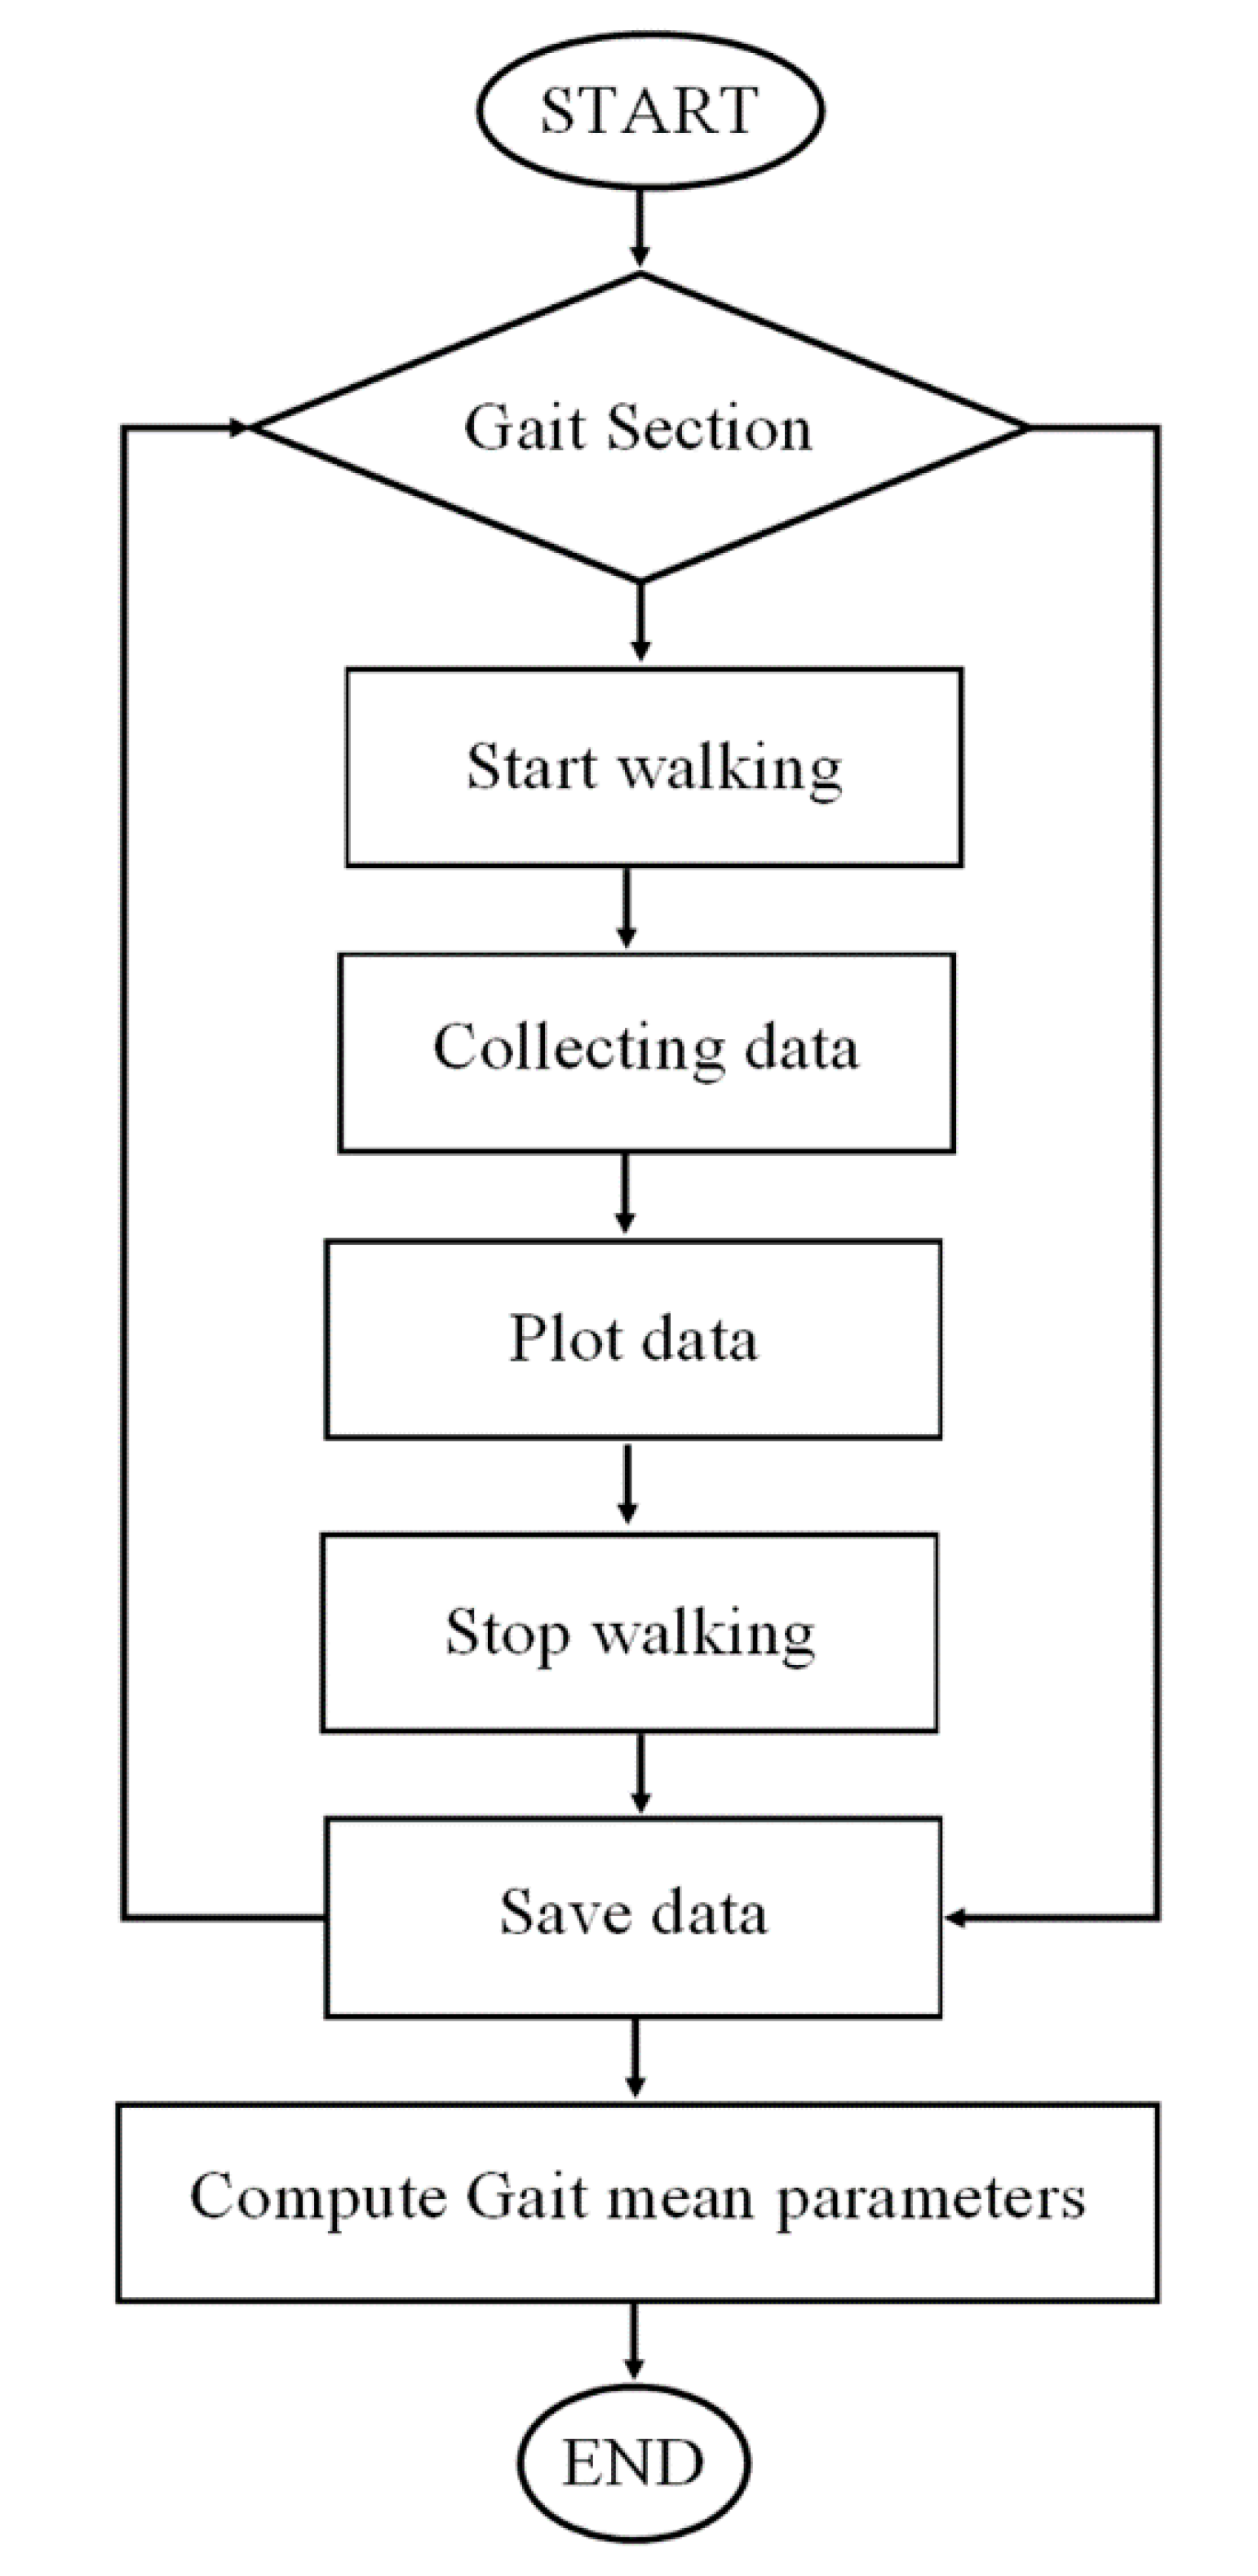 Applied Sciences | Free Full-Text | Test-Retest, Inter-Rater and  Intra-Rater Reliability for Spatiotemporal Gait Parameters Using SANE (an  eaSy gAit aNalysis systEm) as Measuring Instrument